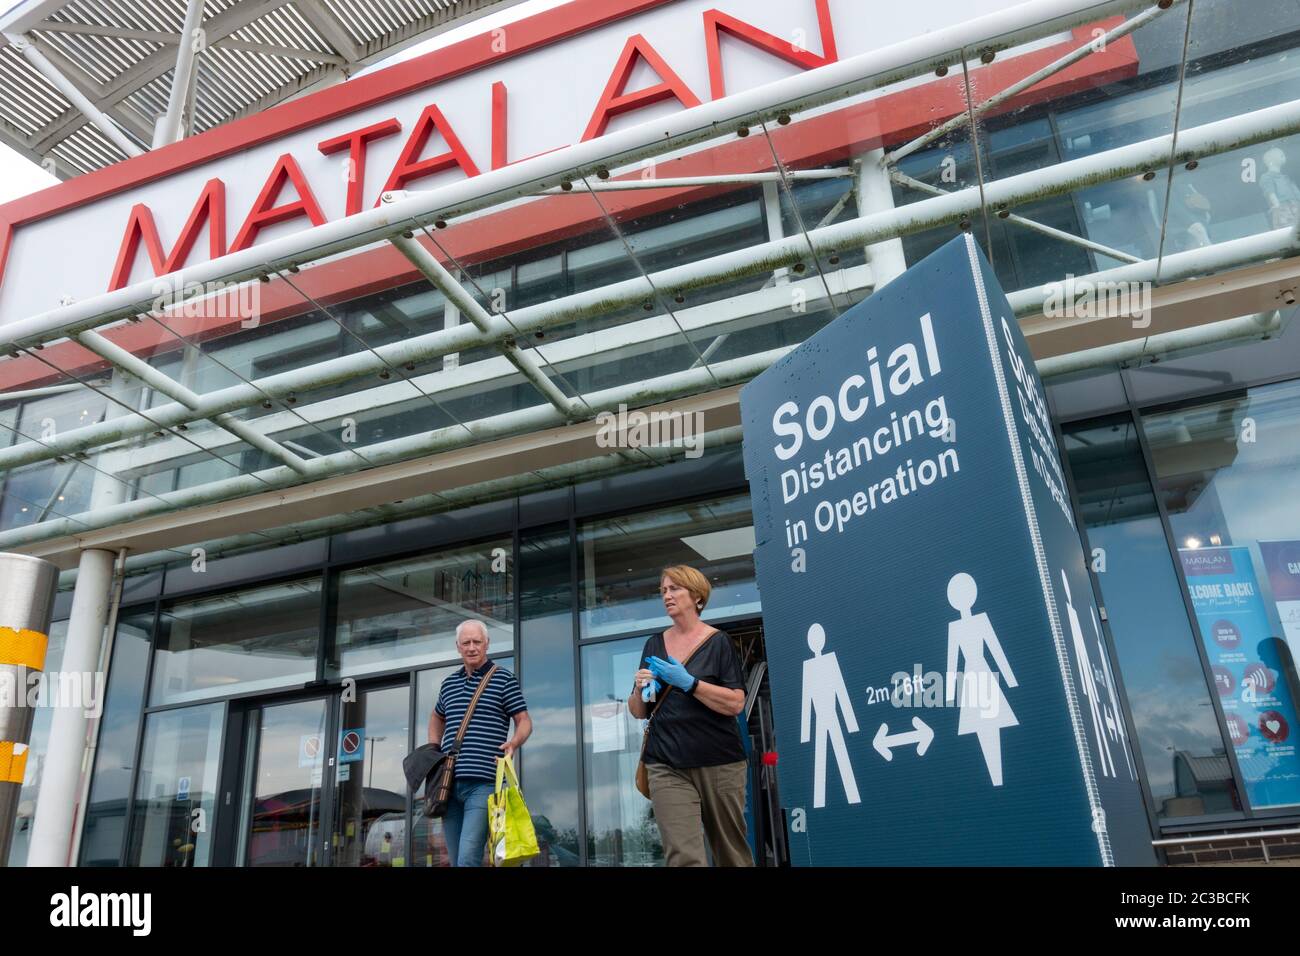 Edinburgh, Scotland, UK. 19 June, 2020. Several shops at Straiton Retail Park outside Edinburgh have opened. Signage warning customers to maintain 2m social distancing is positioned outside and inside shops. Pictured; Matalan shop is open. Iain Masterton/Alamy Live News Stock Photo